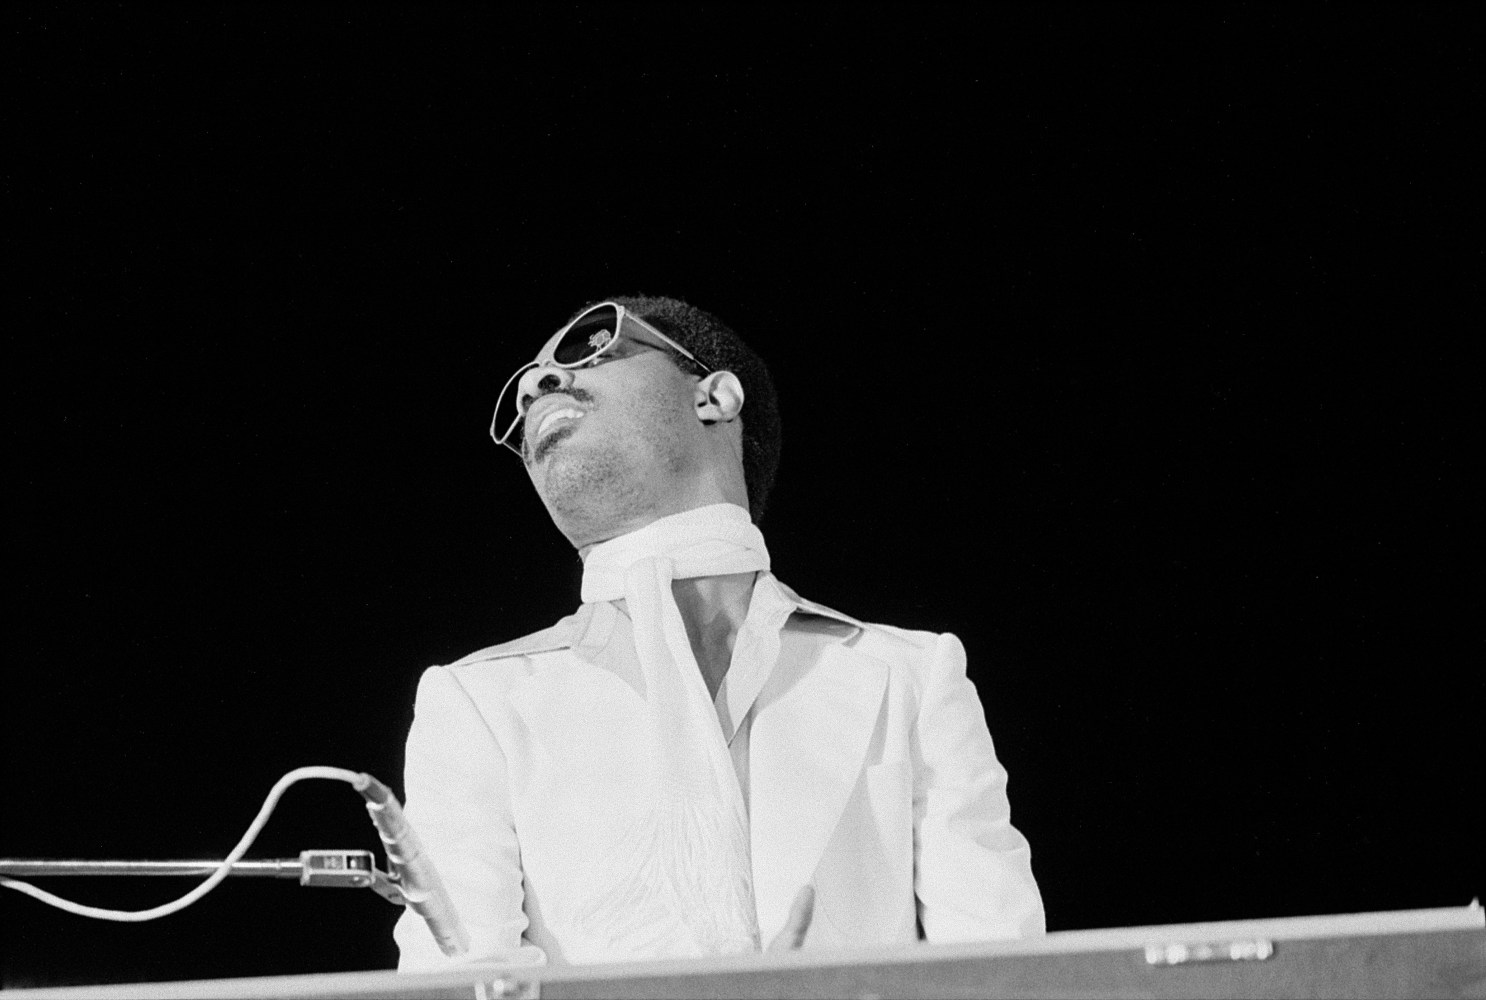 Bob Crawford (1939-2015)
Untitled (Stevie Wonder at FESTAC 1977), 1977
Archival inkjet print on Simply Elegant Gold Fibre paper
Image: 8 x 12 inches (20.3 x 30.5 cm)
Sheet: 11 x 14 inches (27.9 x 35.6 cm)
Edition of 3, printed 2023